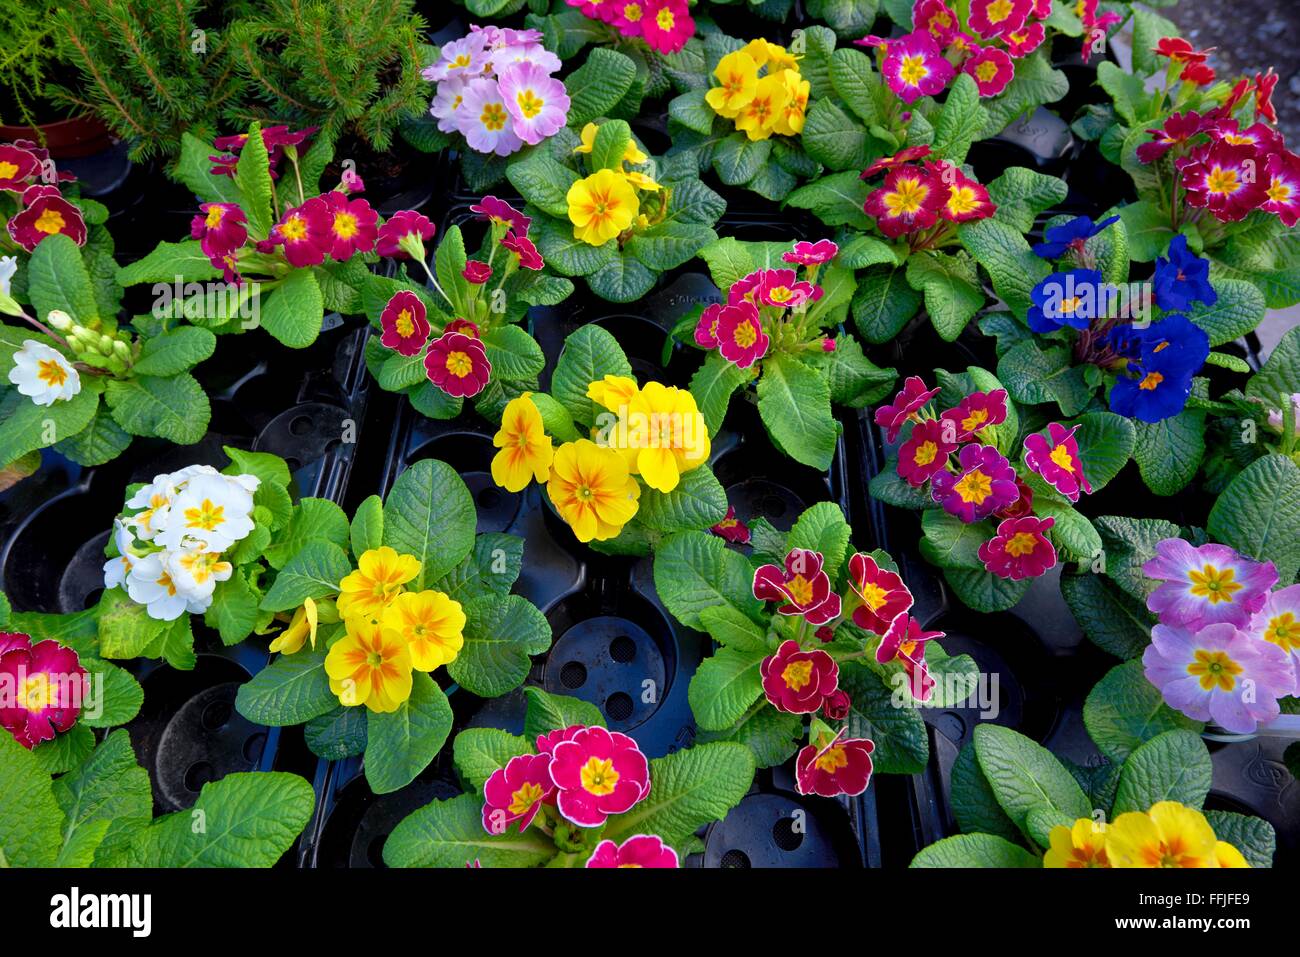 Bedding plants for sale on an outdoor display Cromford mill Derbyshire England UK Stock Photo